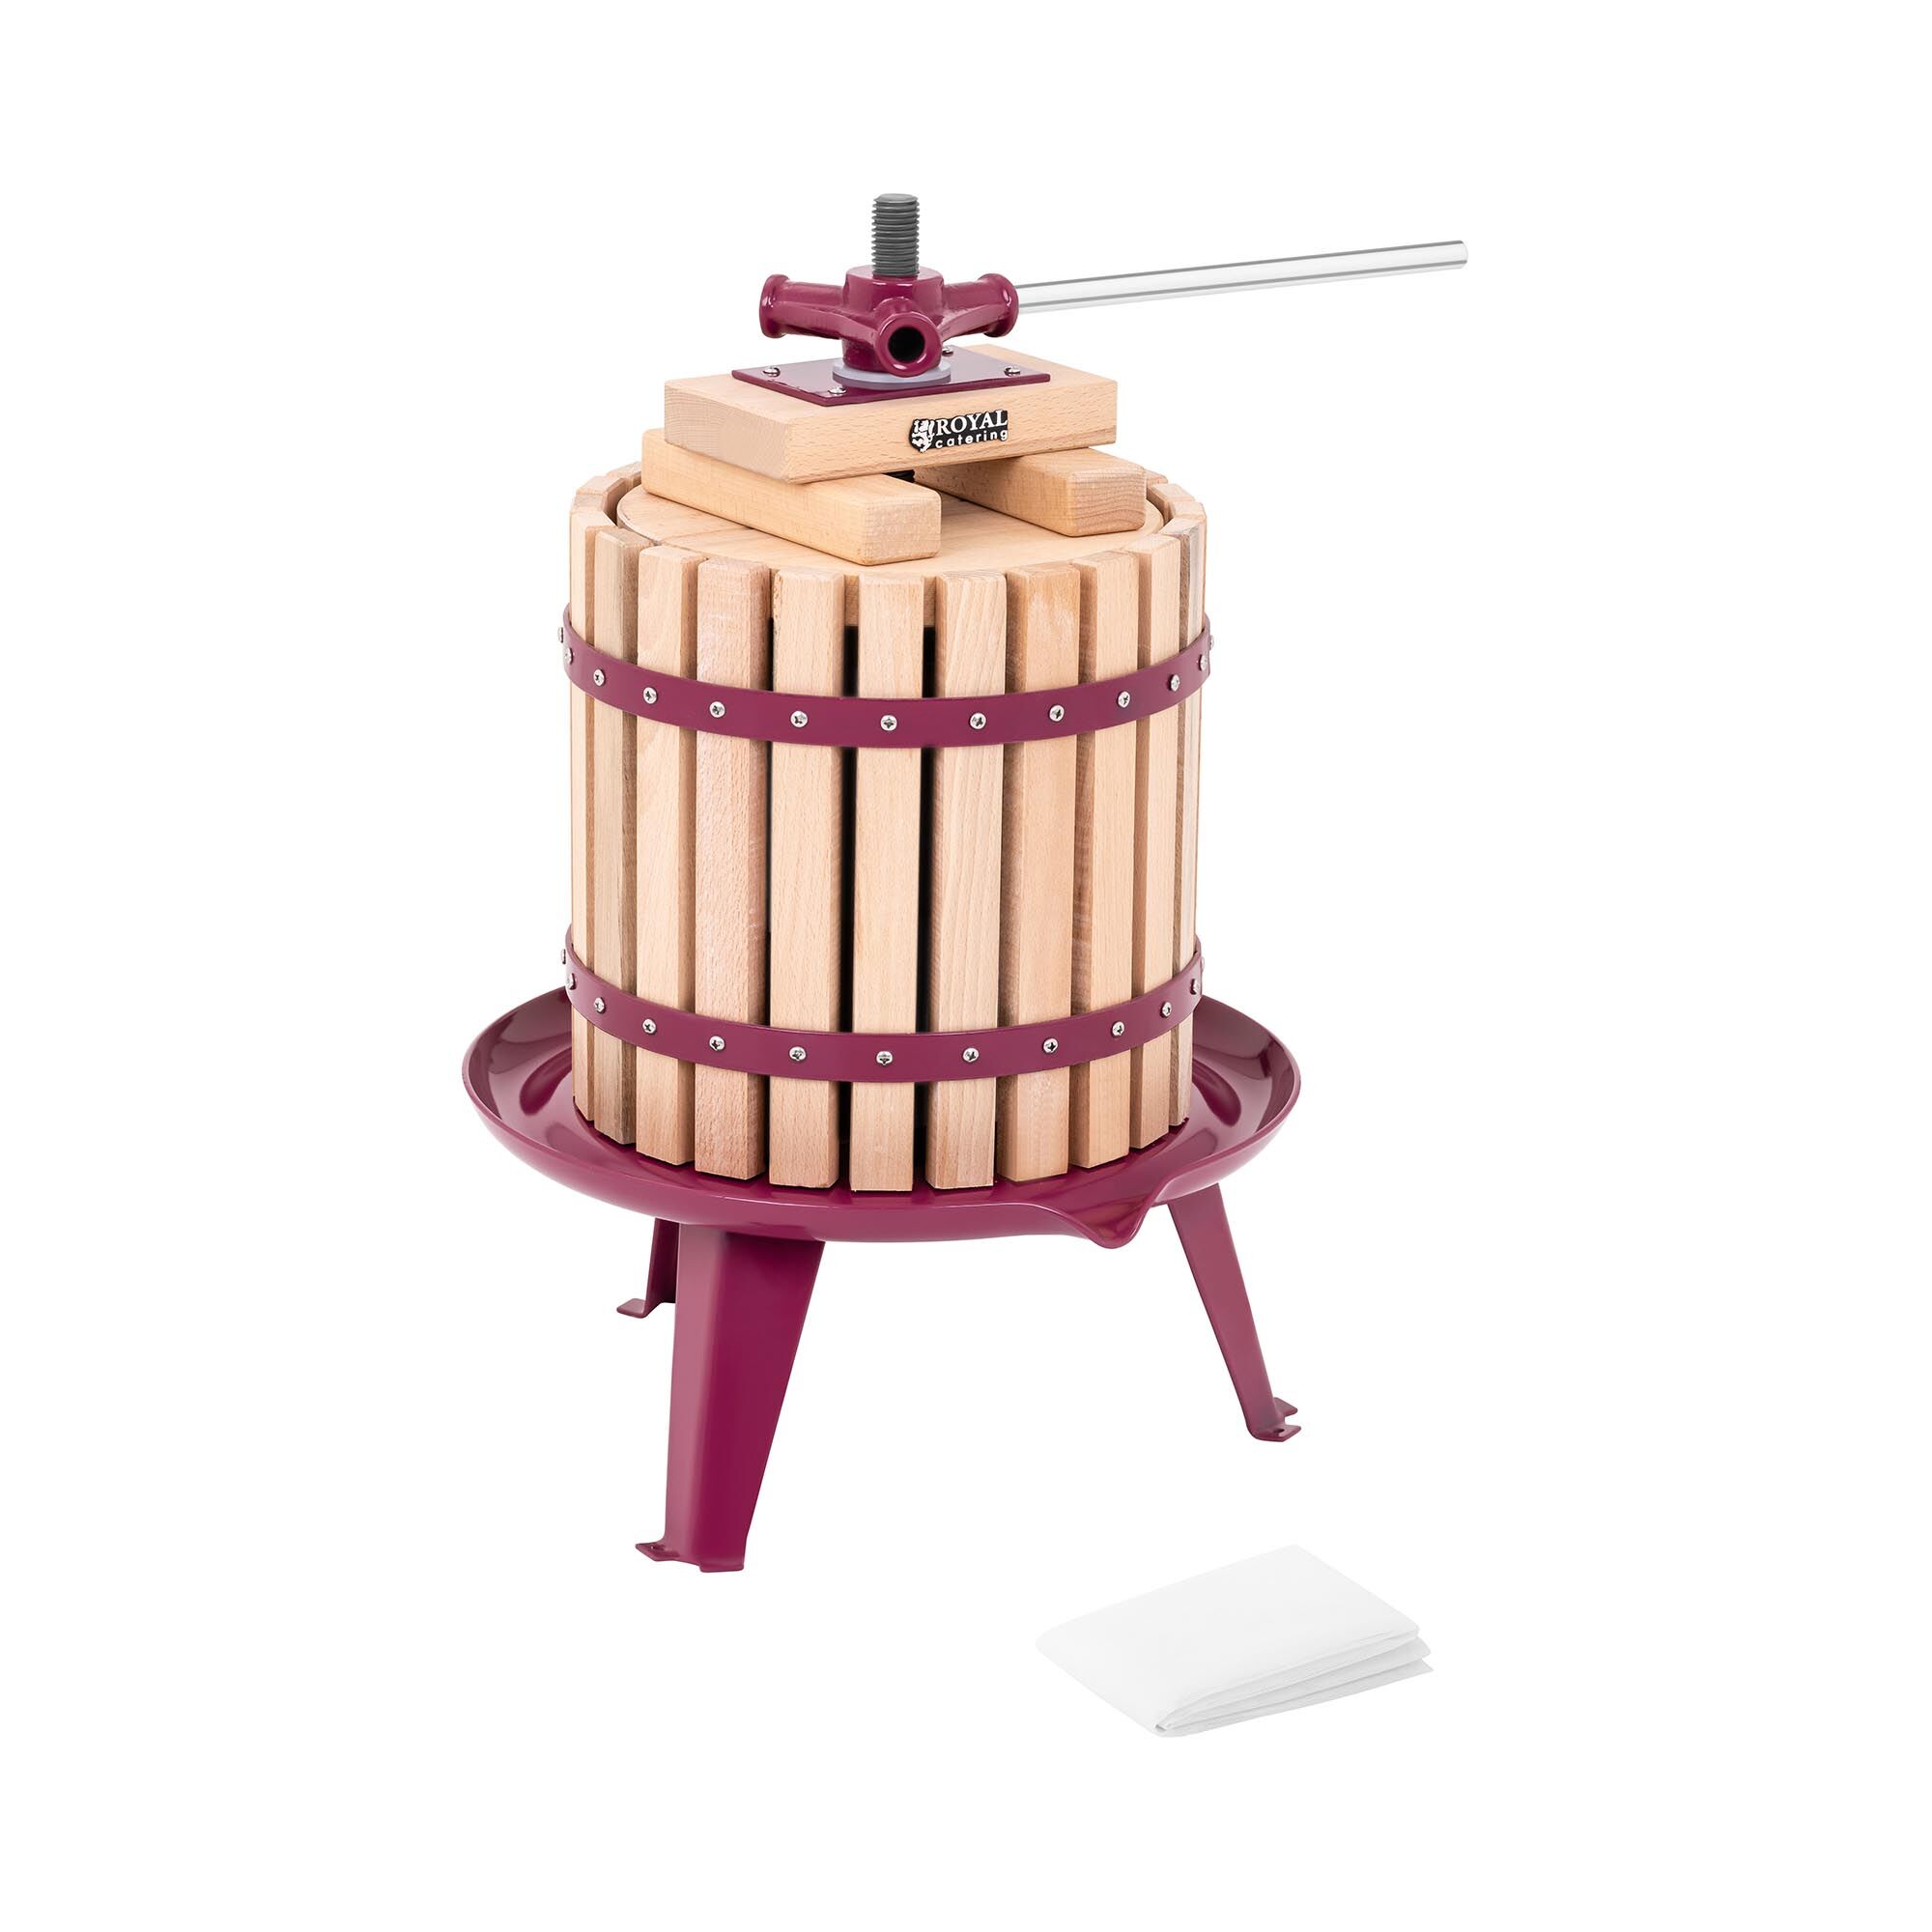 Royal Catering Fruit Press - manual - wooden - 12 L - incl. wooden blocks, pressure plate and pressing cloth